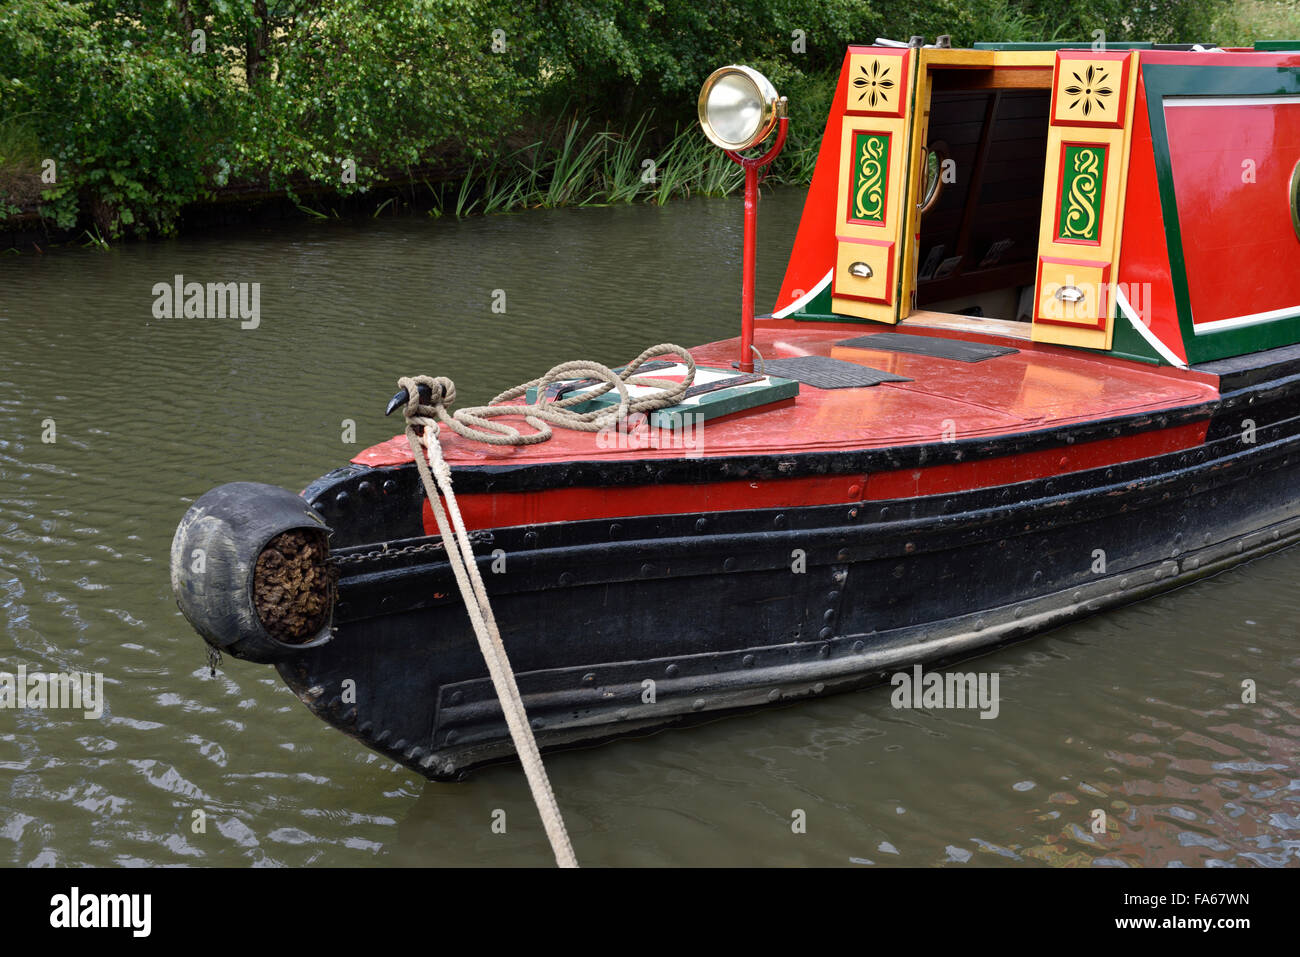 Bow of traditional canal narrow boat Stock Photo